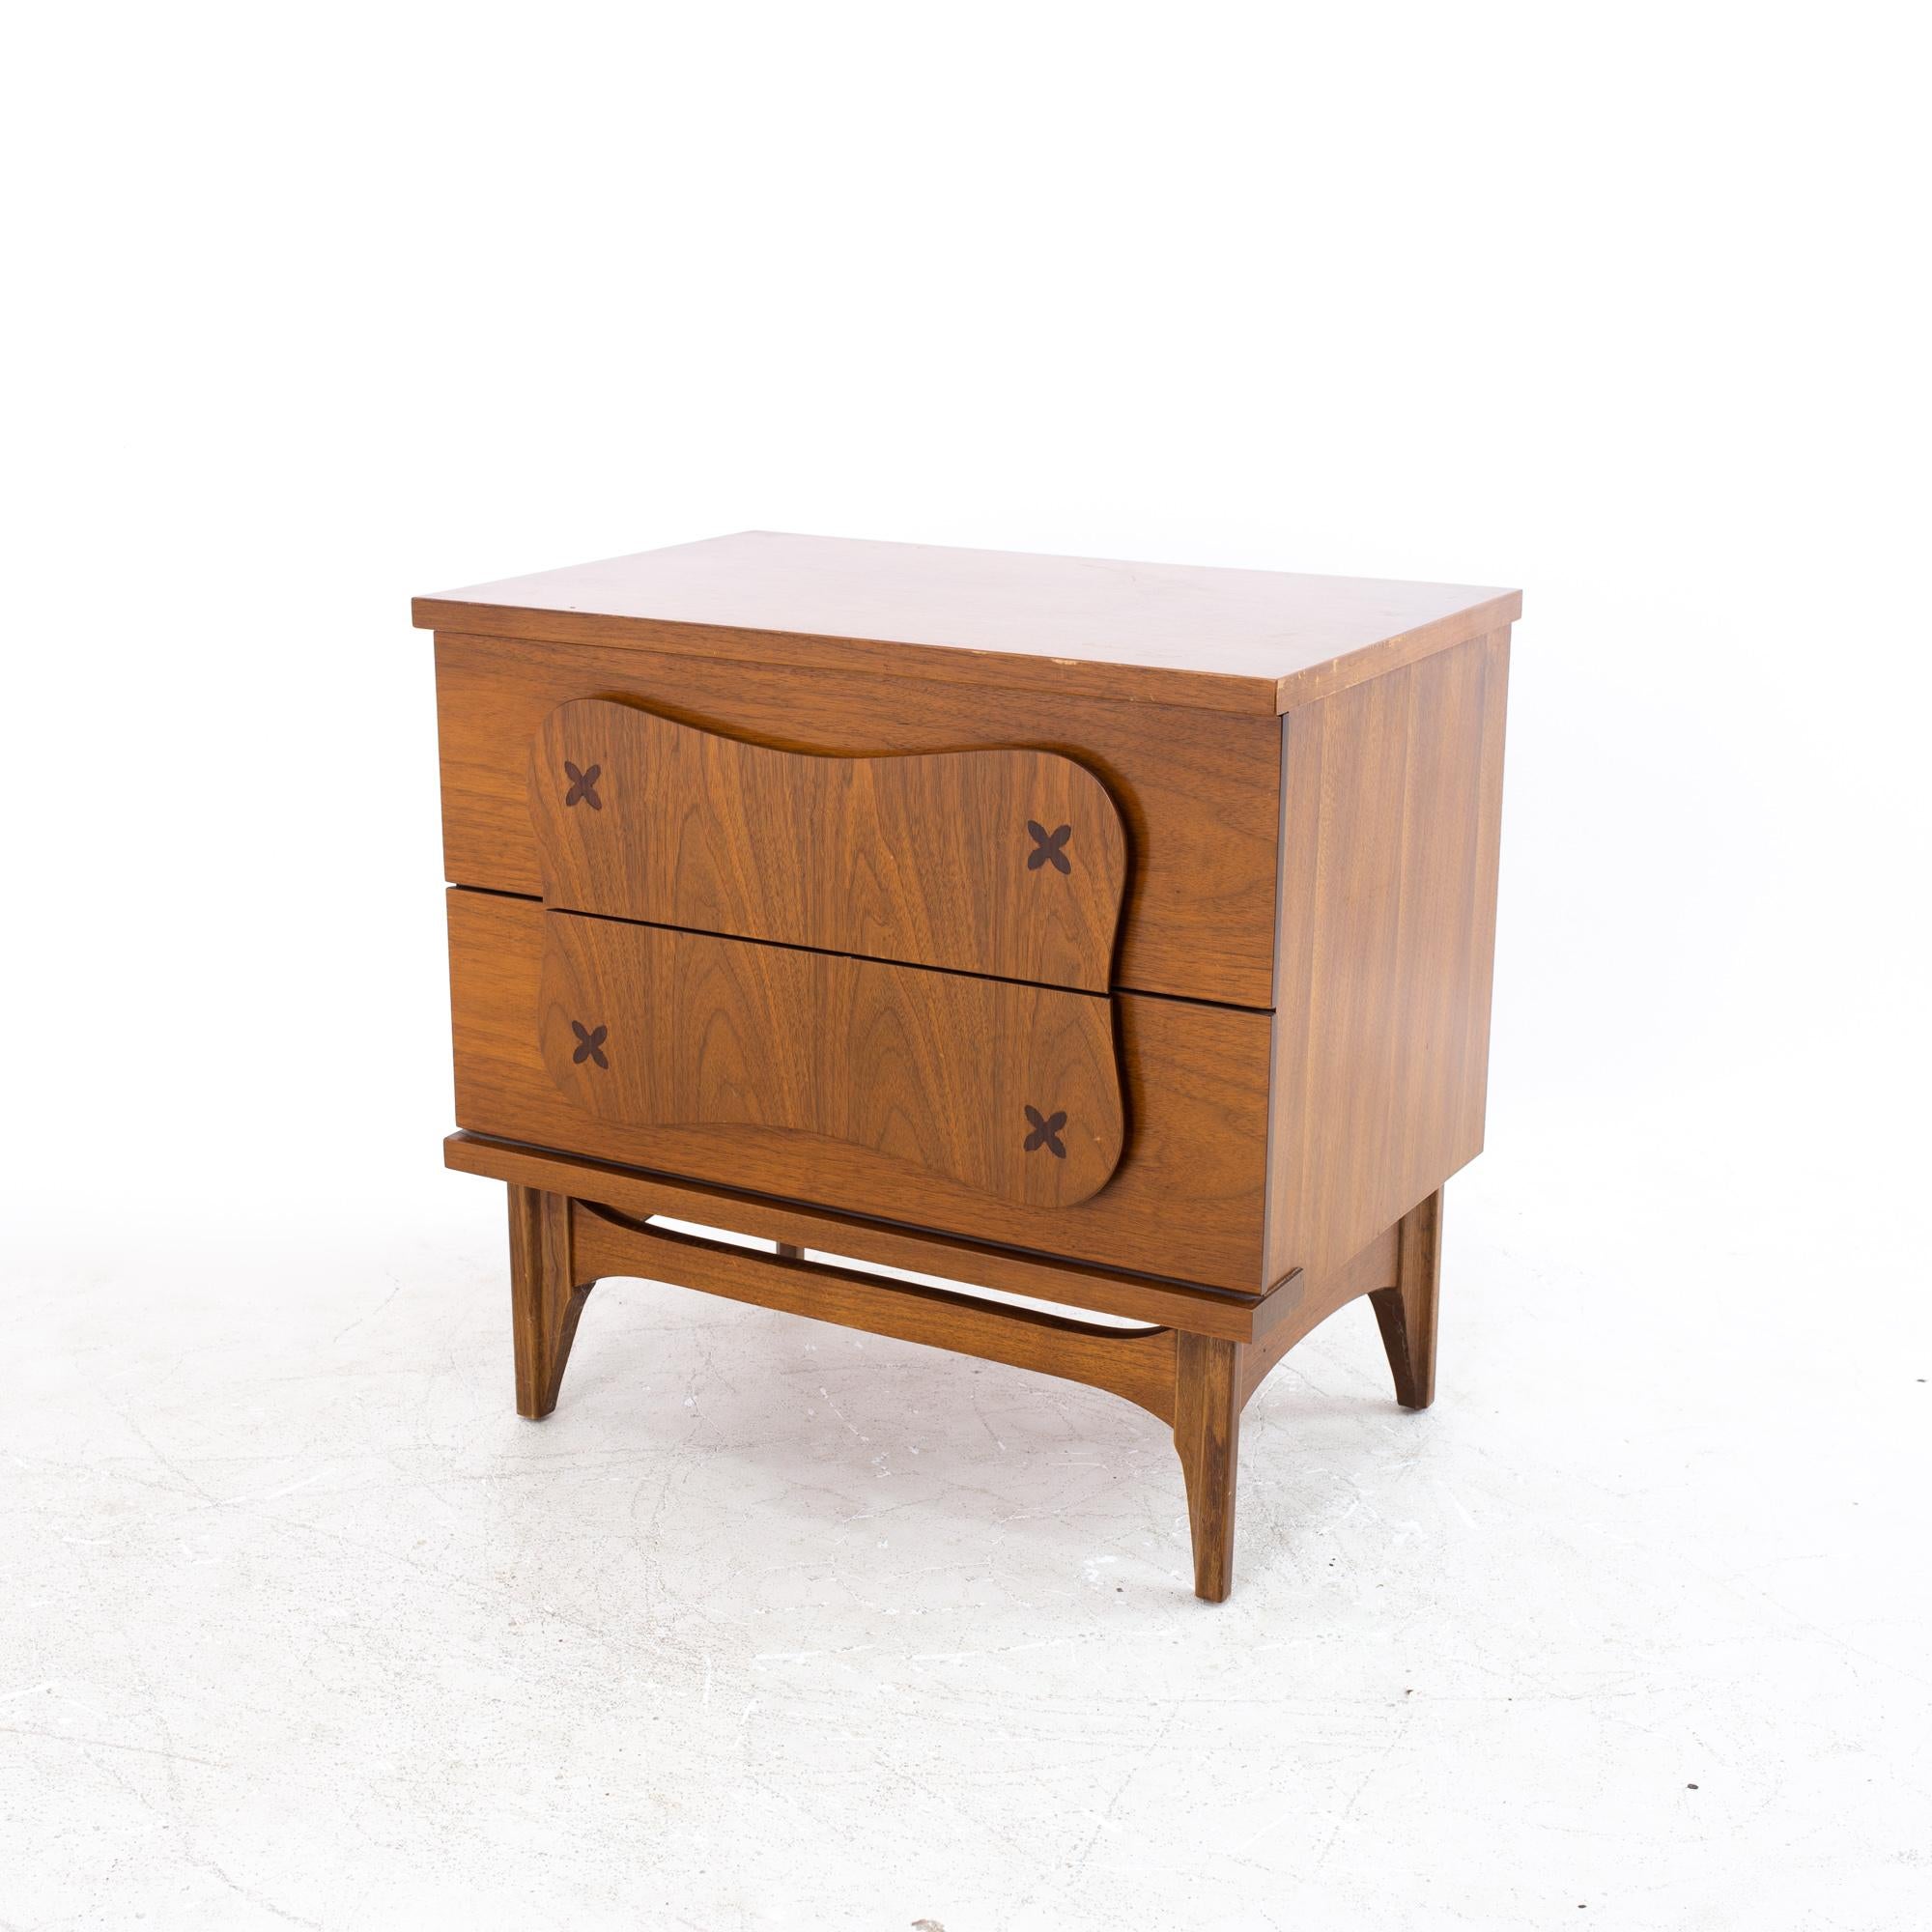 Merton Gershun style Bassett furniture mid century walnut nightstand.
Nightstand measures: 24 wide x 16 deep x 23.25 high

All pieces of furniture can be had in what we call restored vintage condition. That means the piece is restored upon